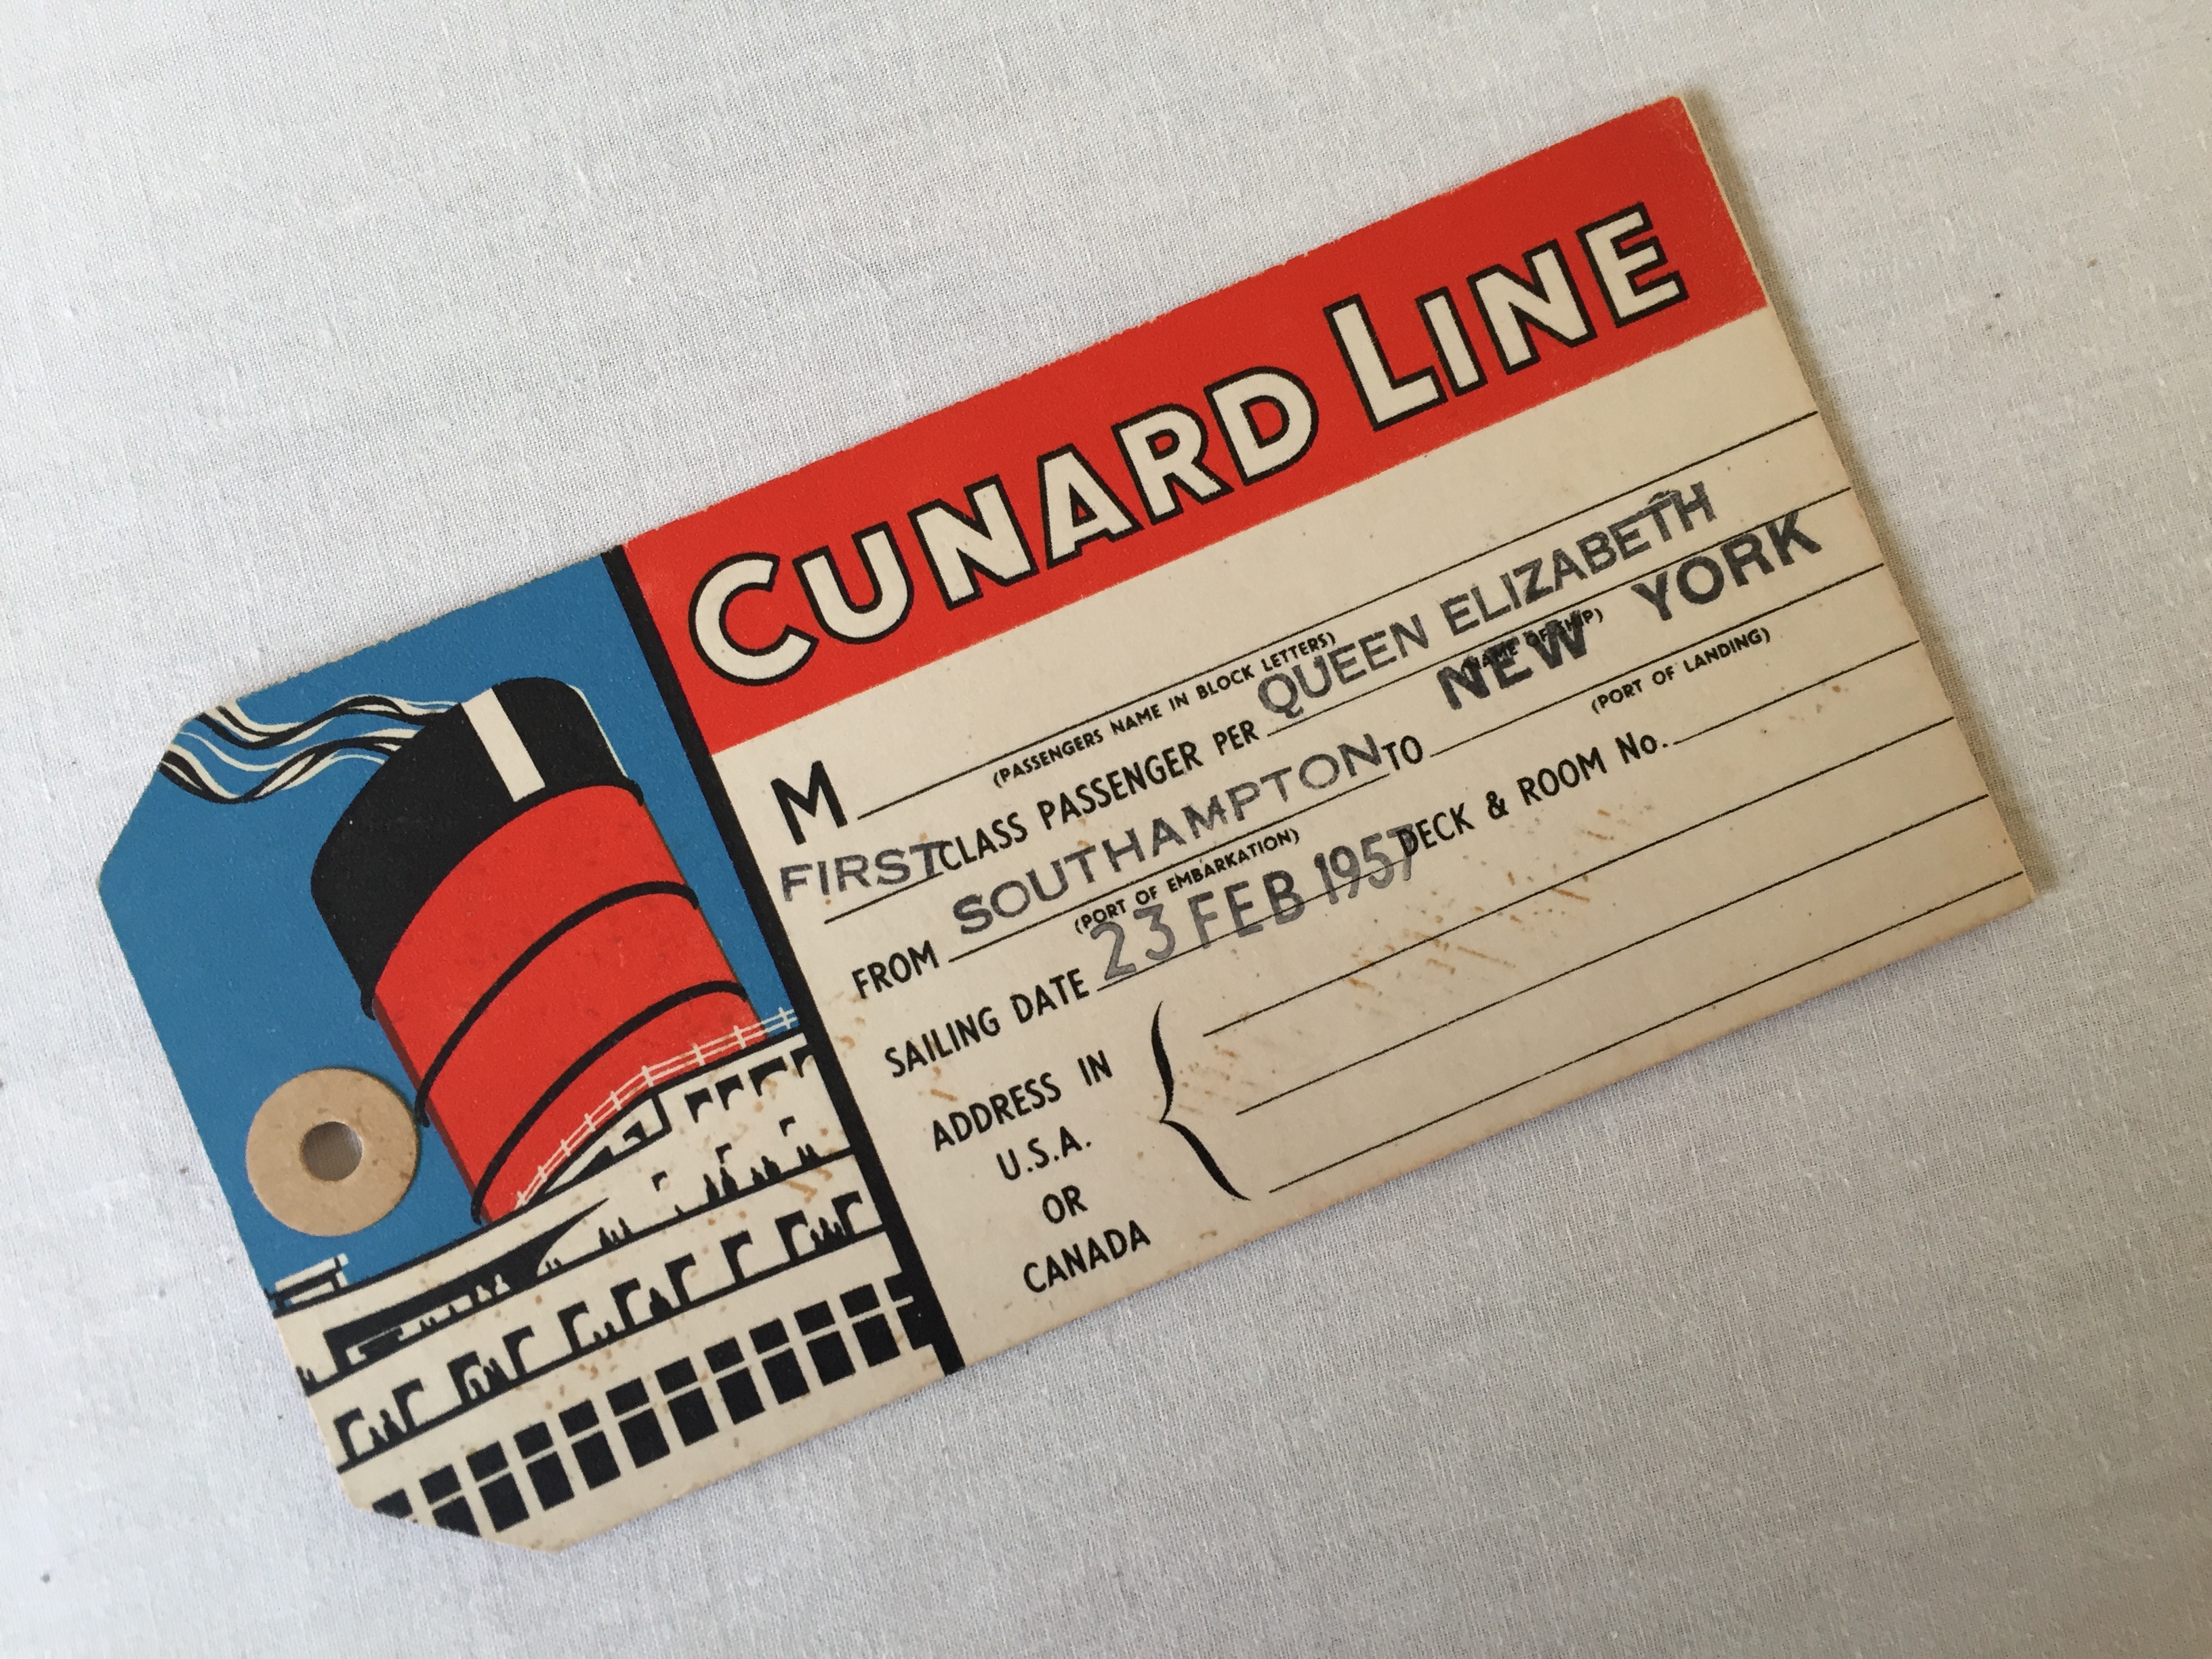 RARE FIRST-CLASS LUGGAGE LABEL FROM THE LINER QUEEN ELIZABETH DATED 1957